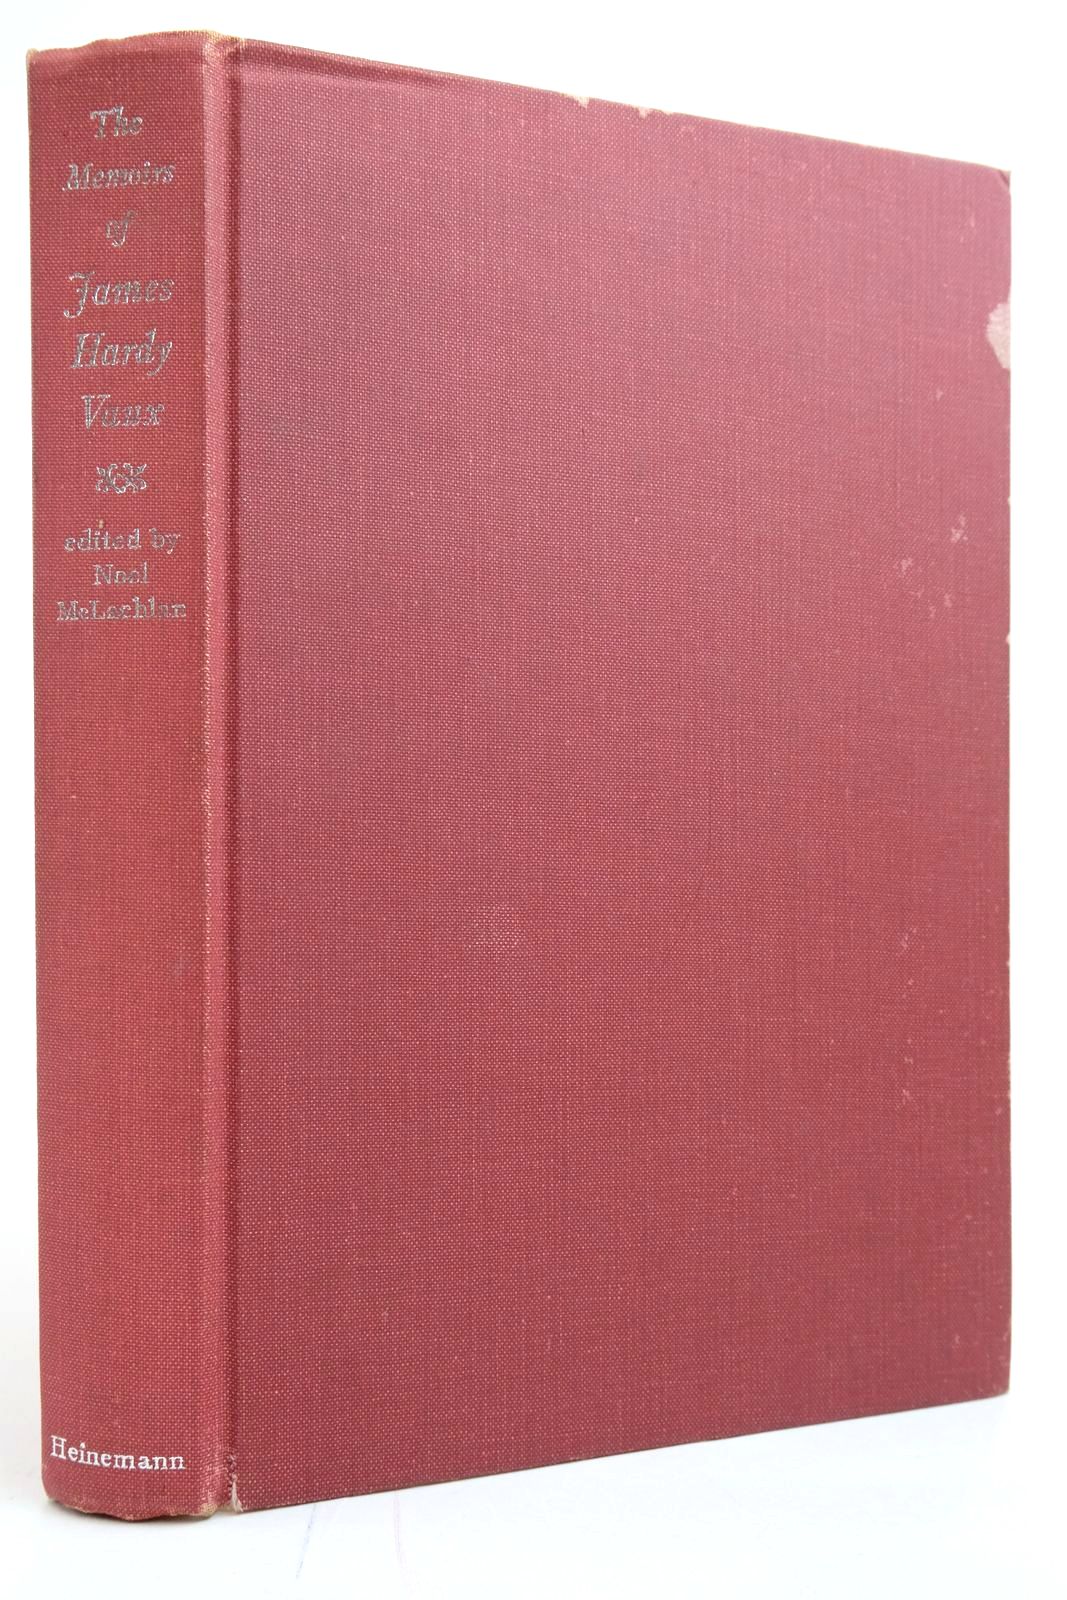 Photo of MEMOIRS OF JAMES HARDY VAUX written by Vaux, James Hardy McLachlan, Noel published by Heinemann (STOCK CODE: 2135186)  for sale by Stella & Rose's Books